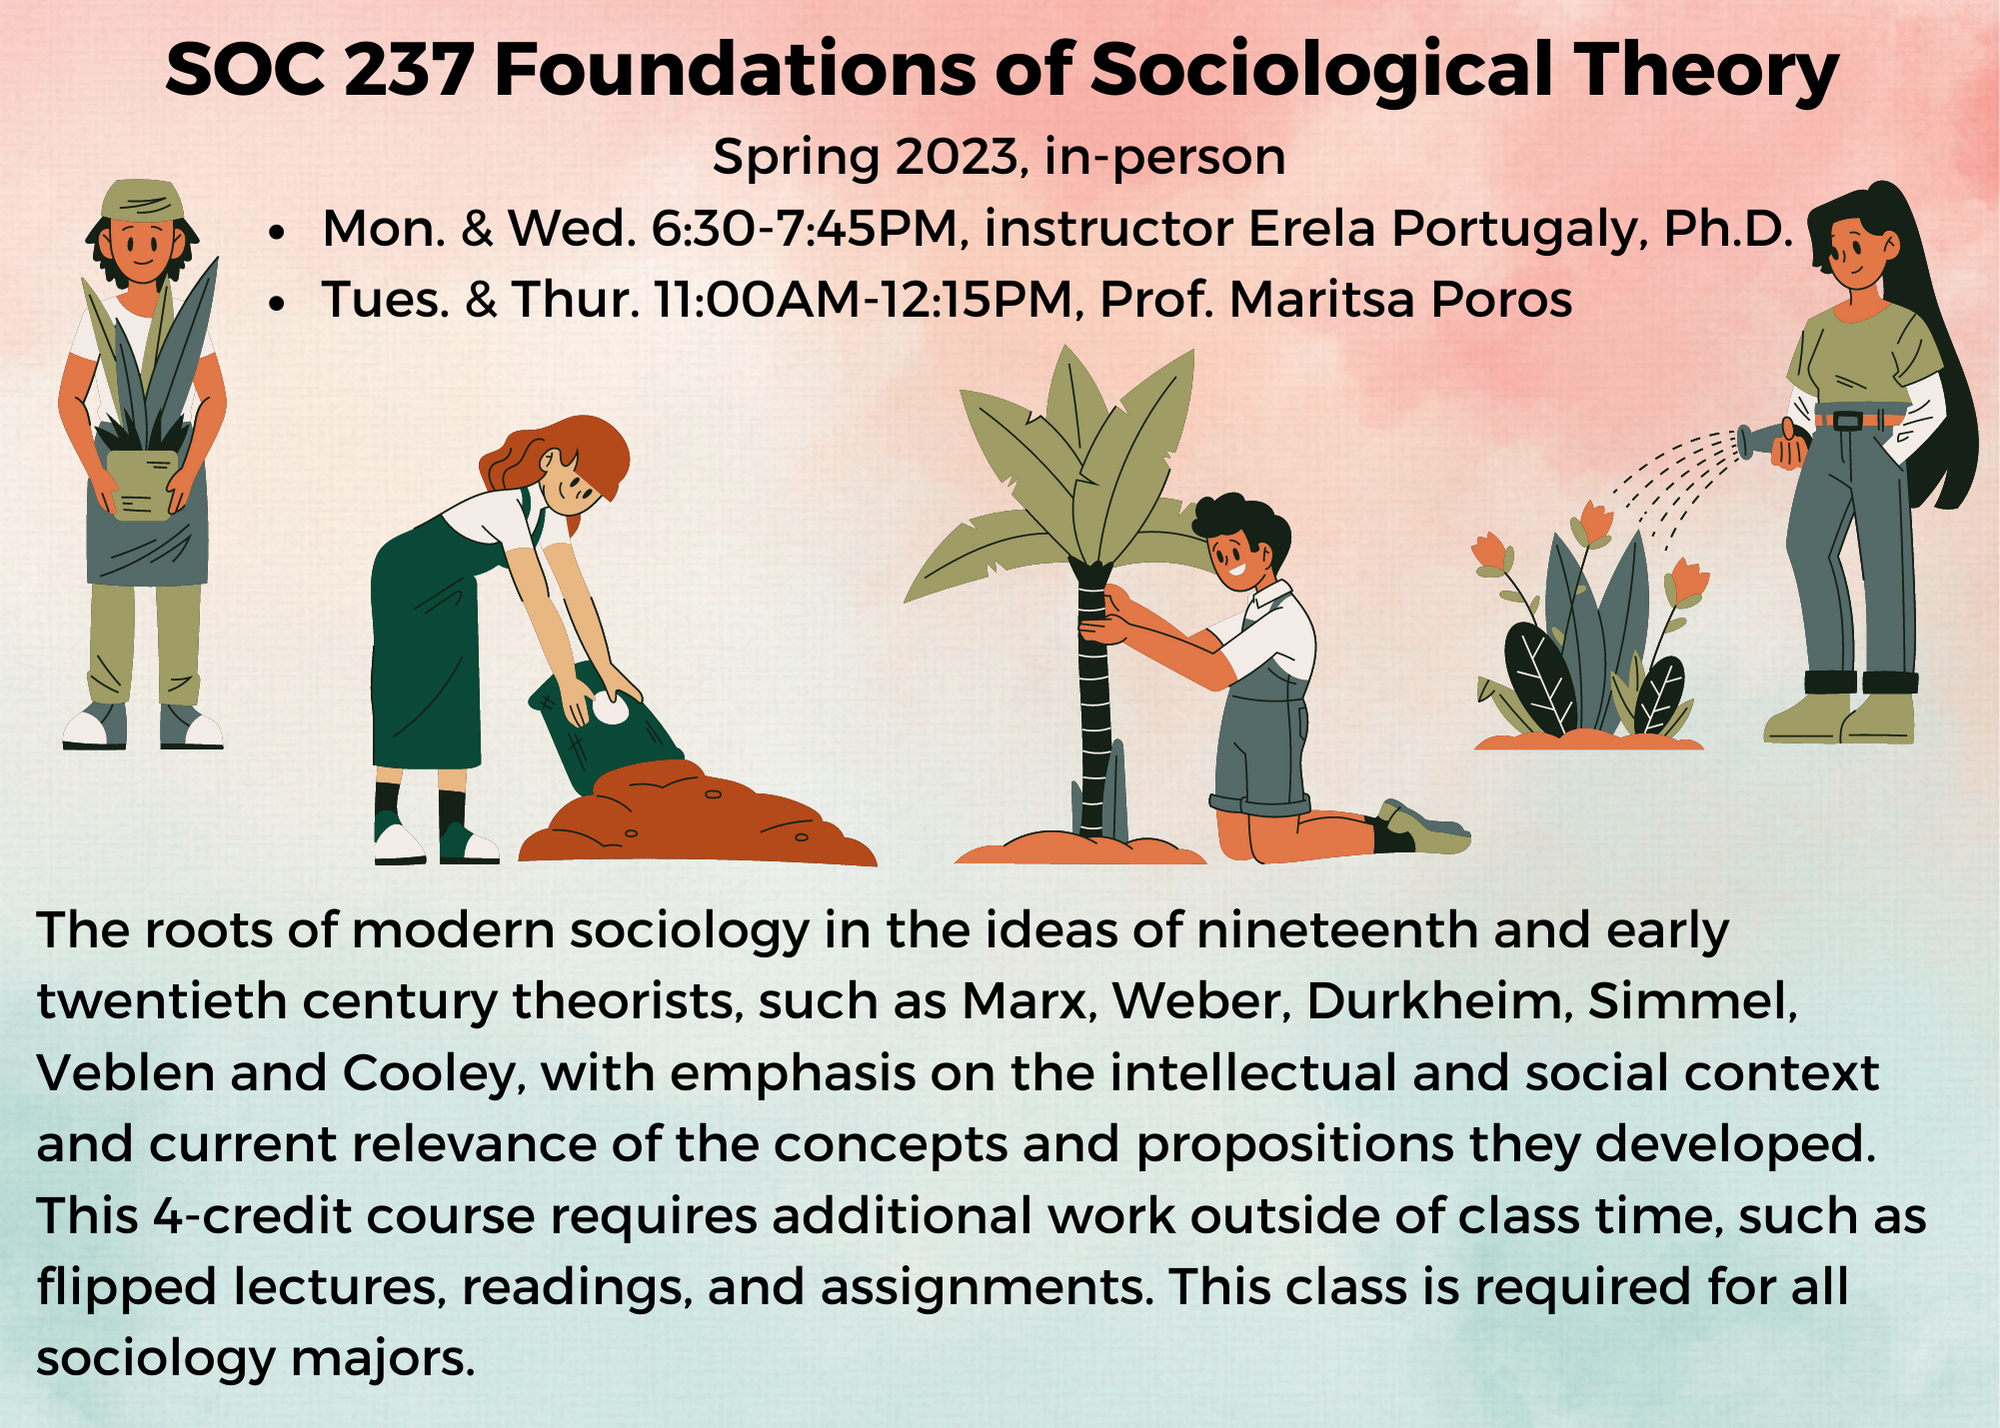 Foundations of Sociological Theory Spring 2023 Course